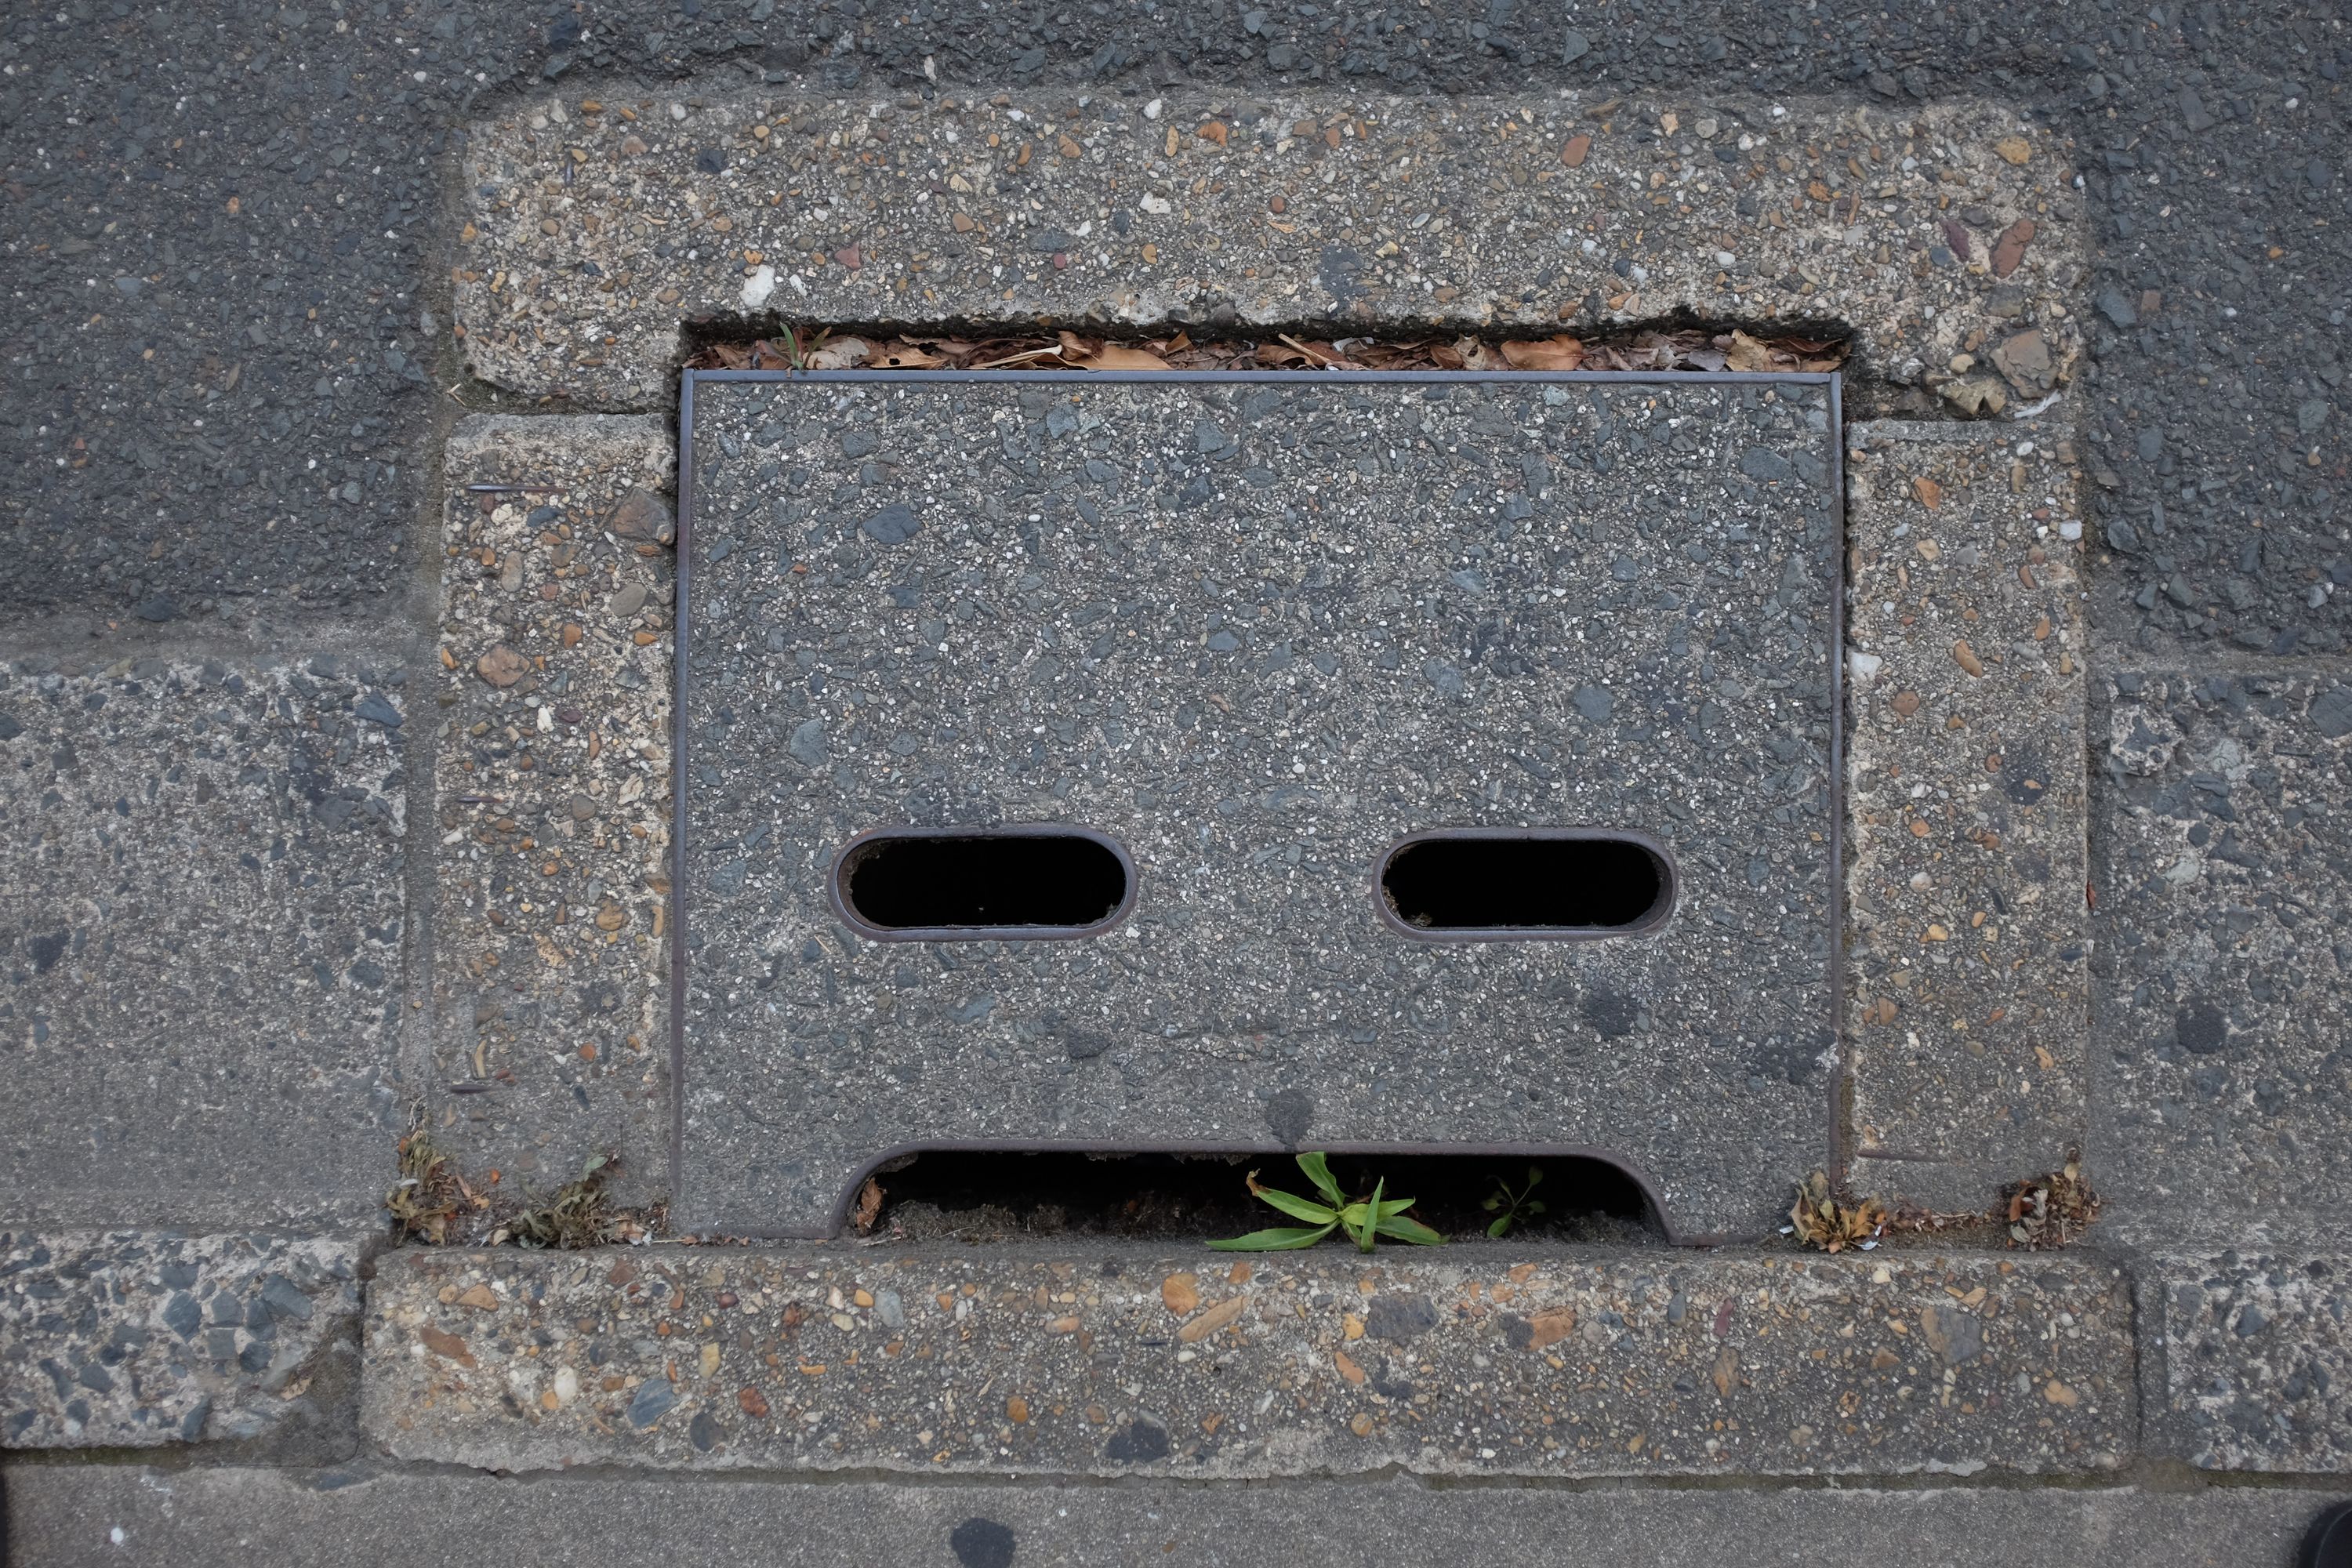 A concrete storm drain shaped like an angry robot face.